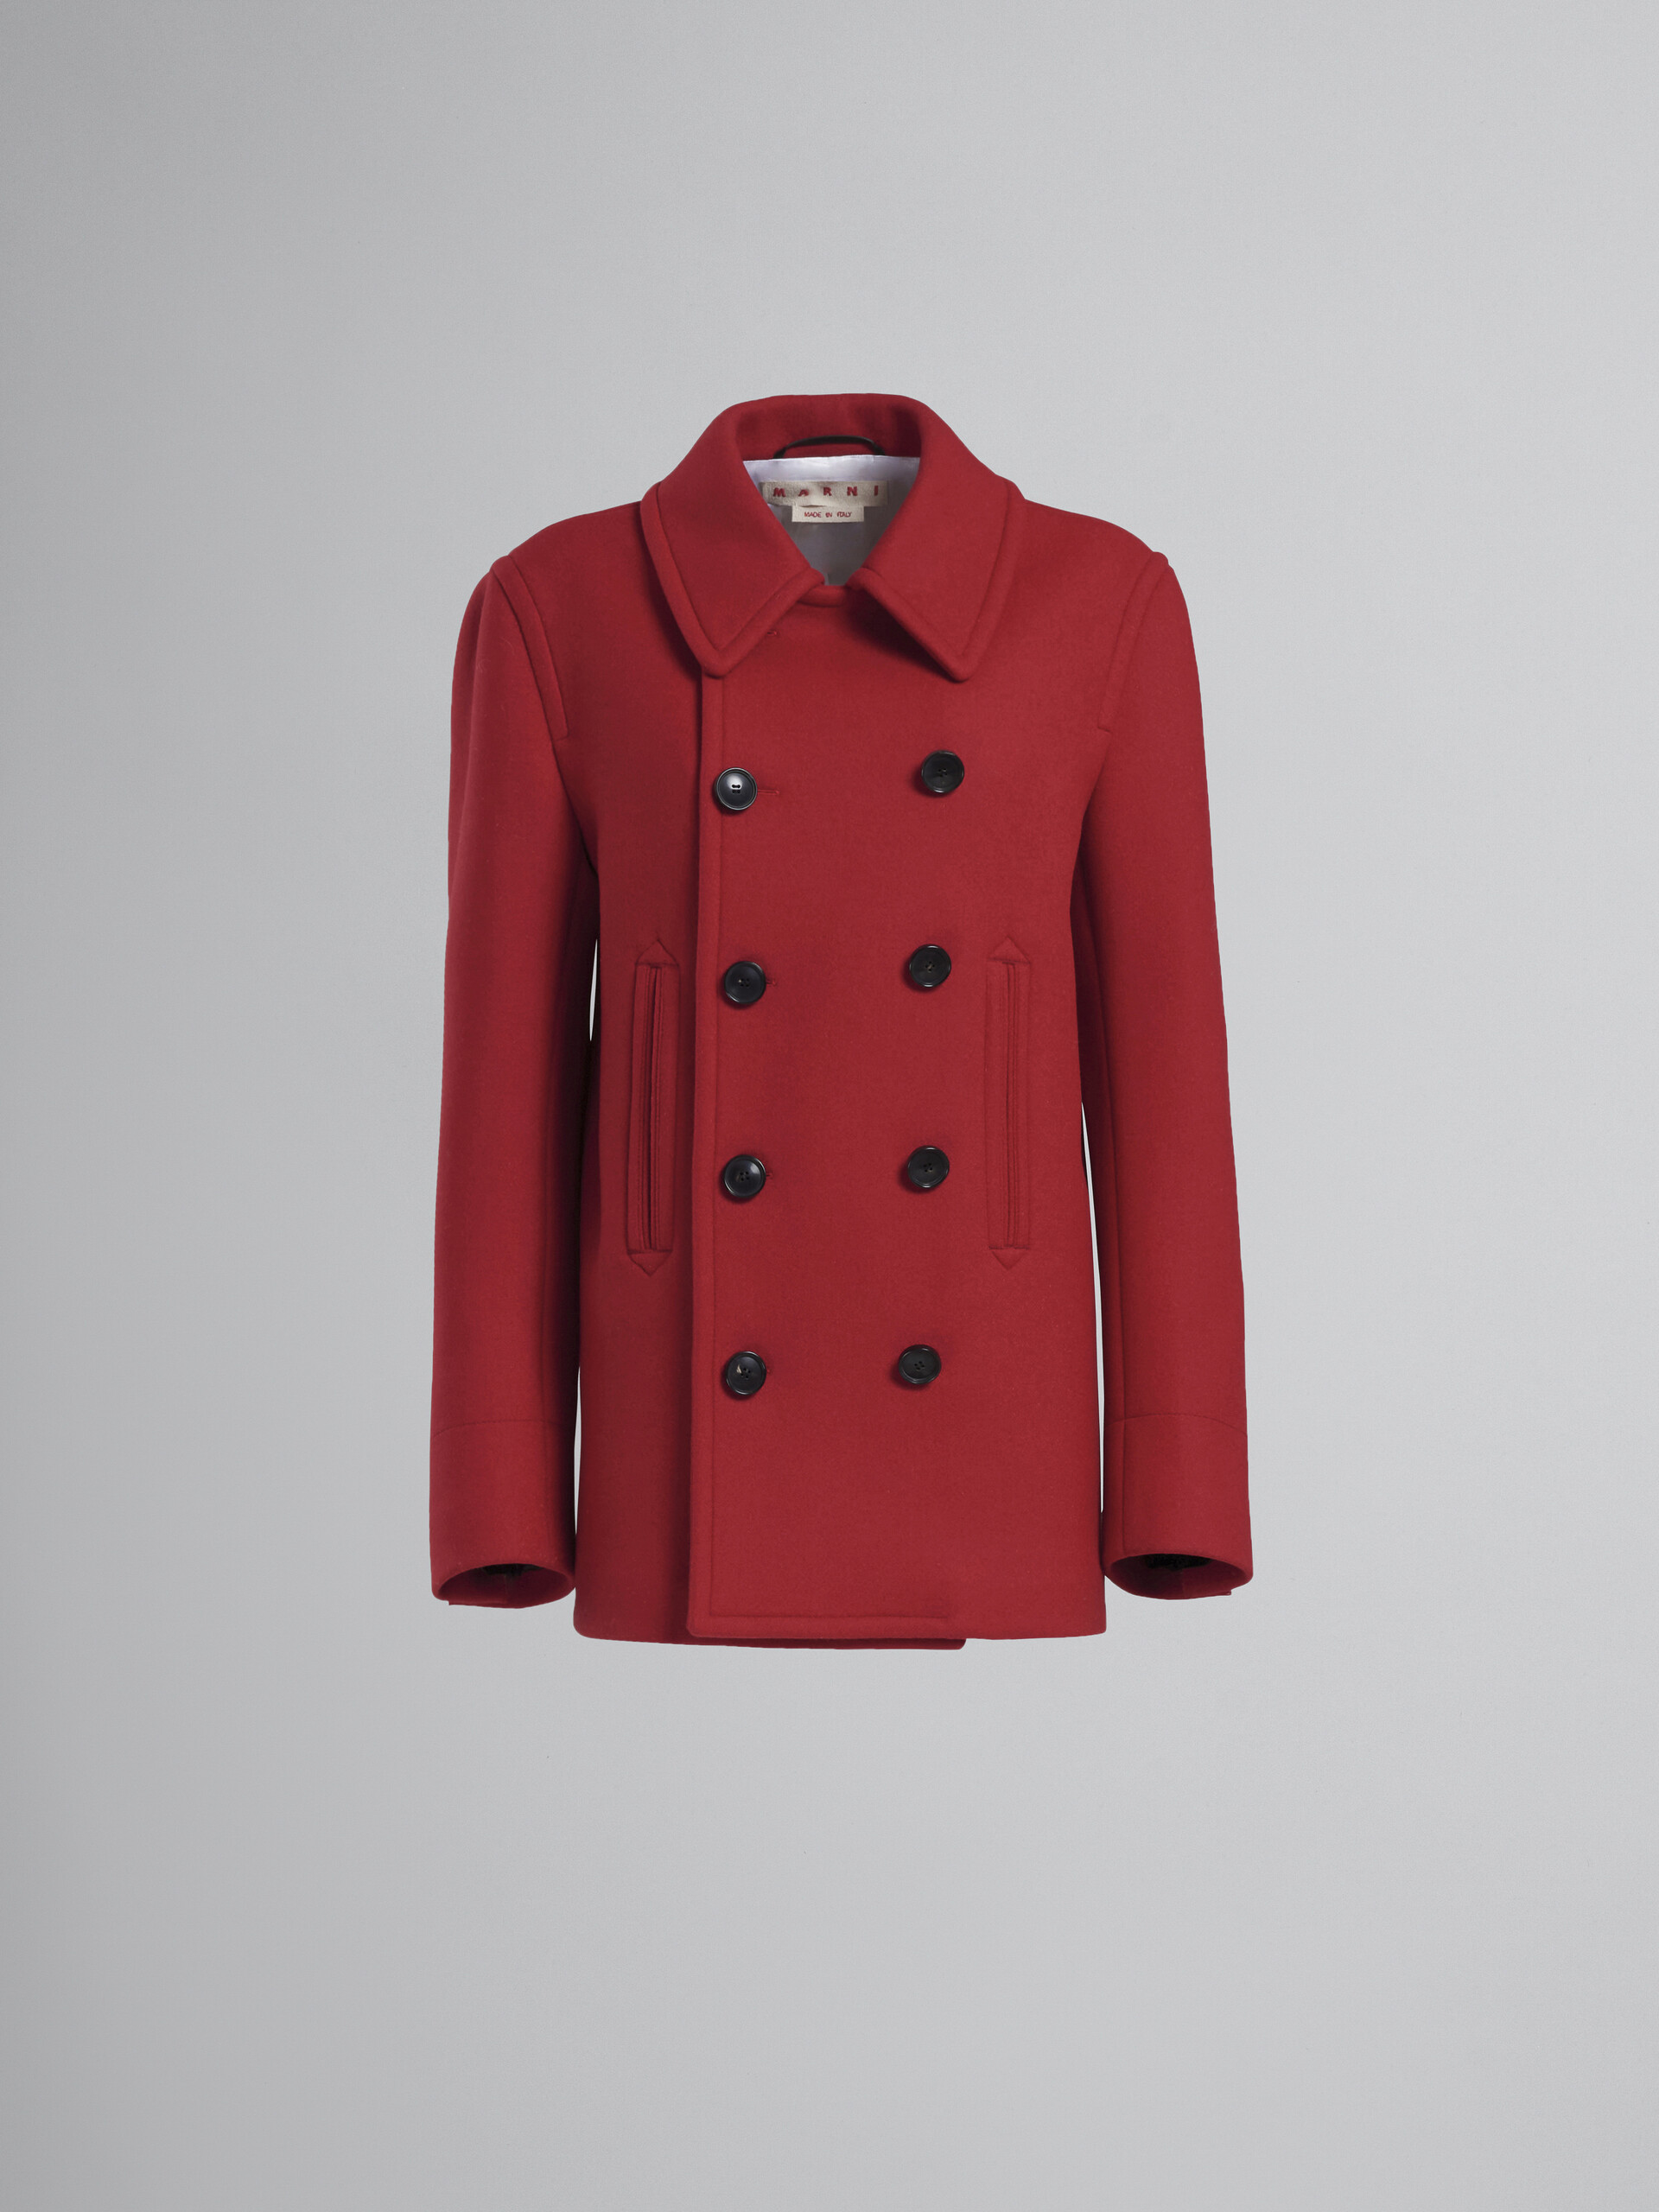 Red wool double-breasted peacoat - Jackets - Image 1